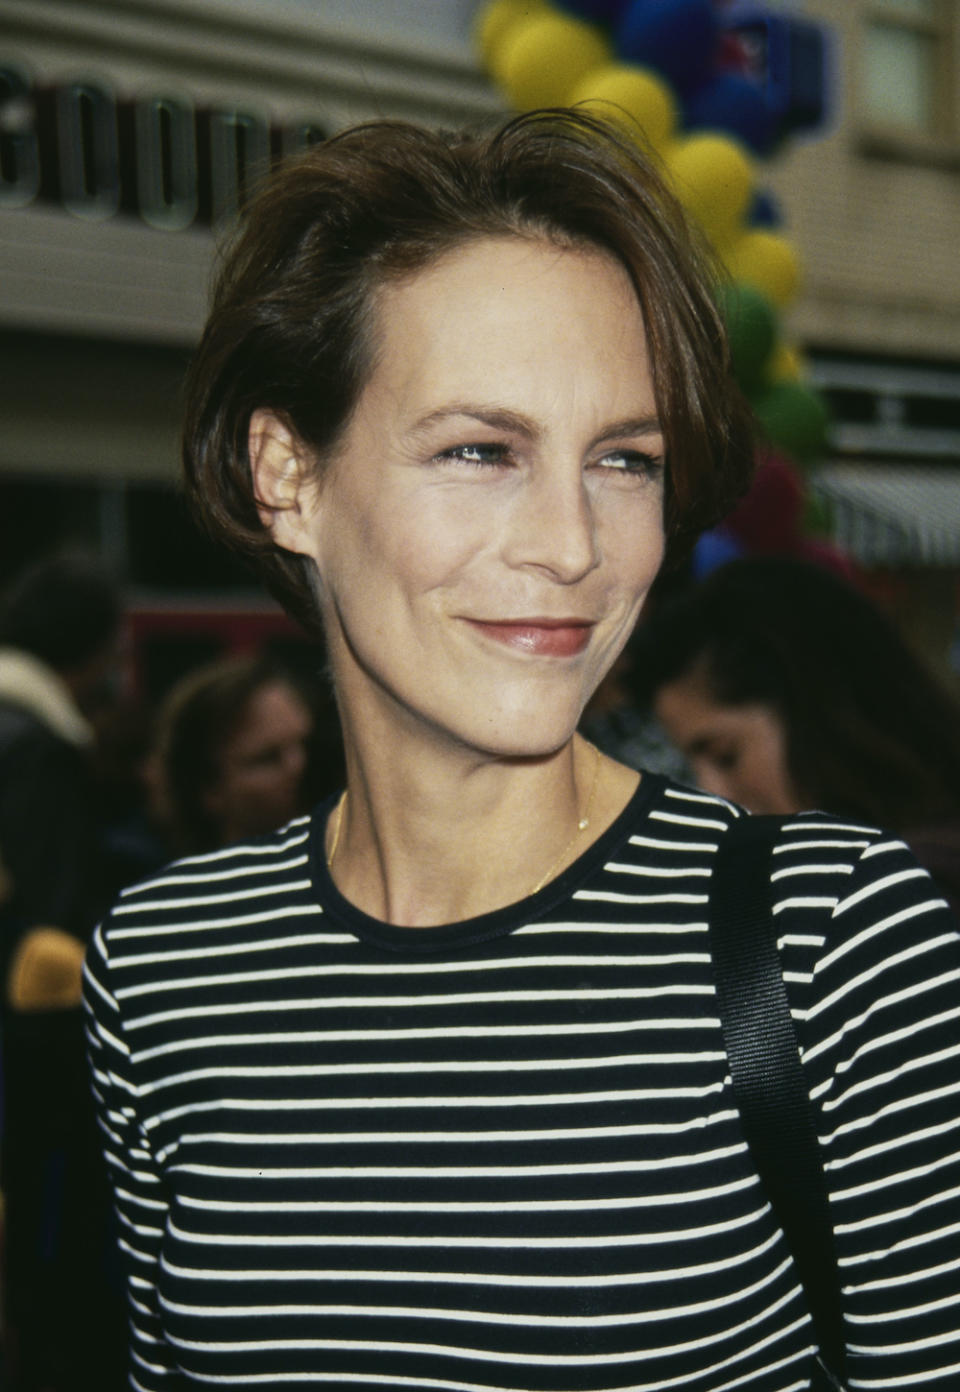 Jamie Lee Curtis attends My Girl 2 premiere, United States, 1994